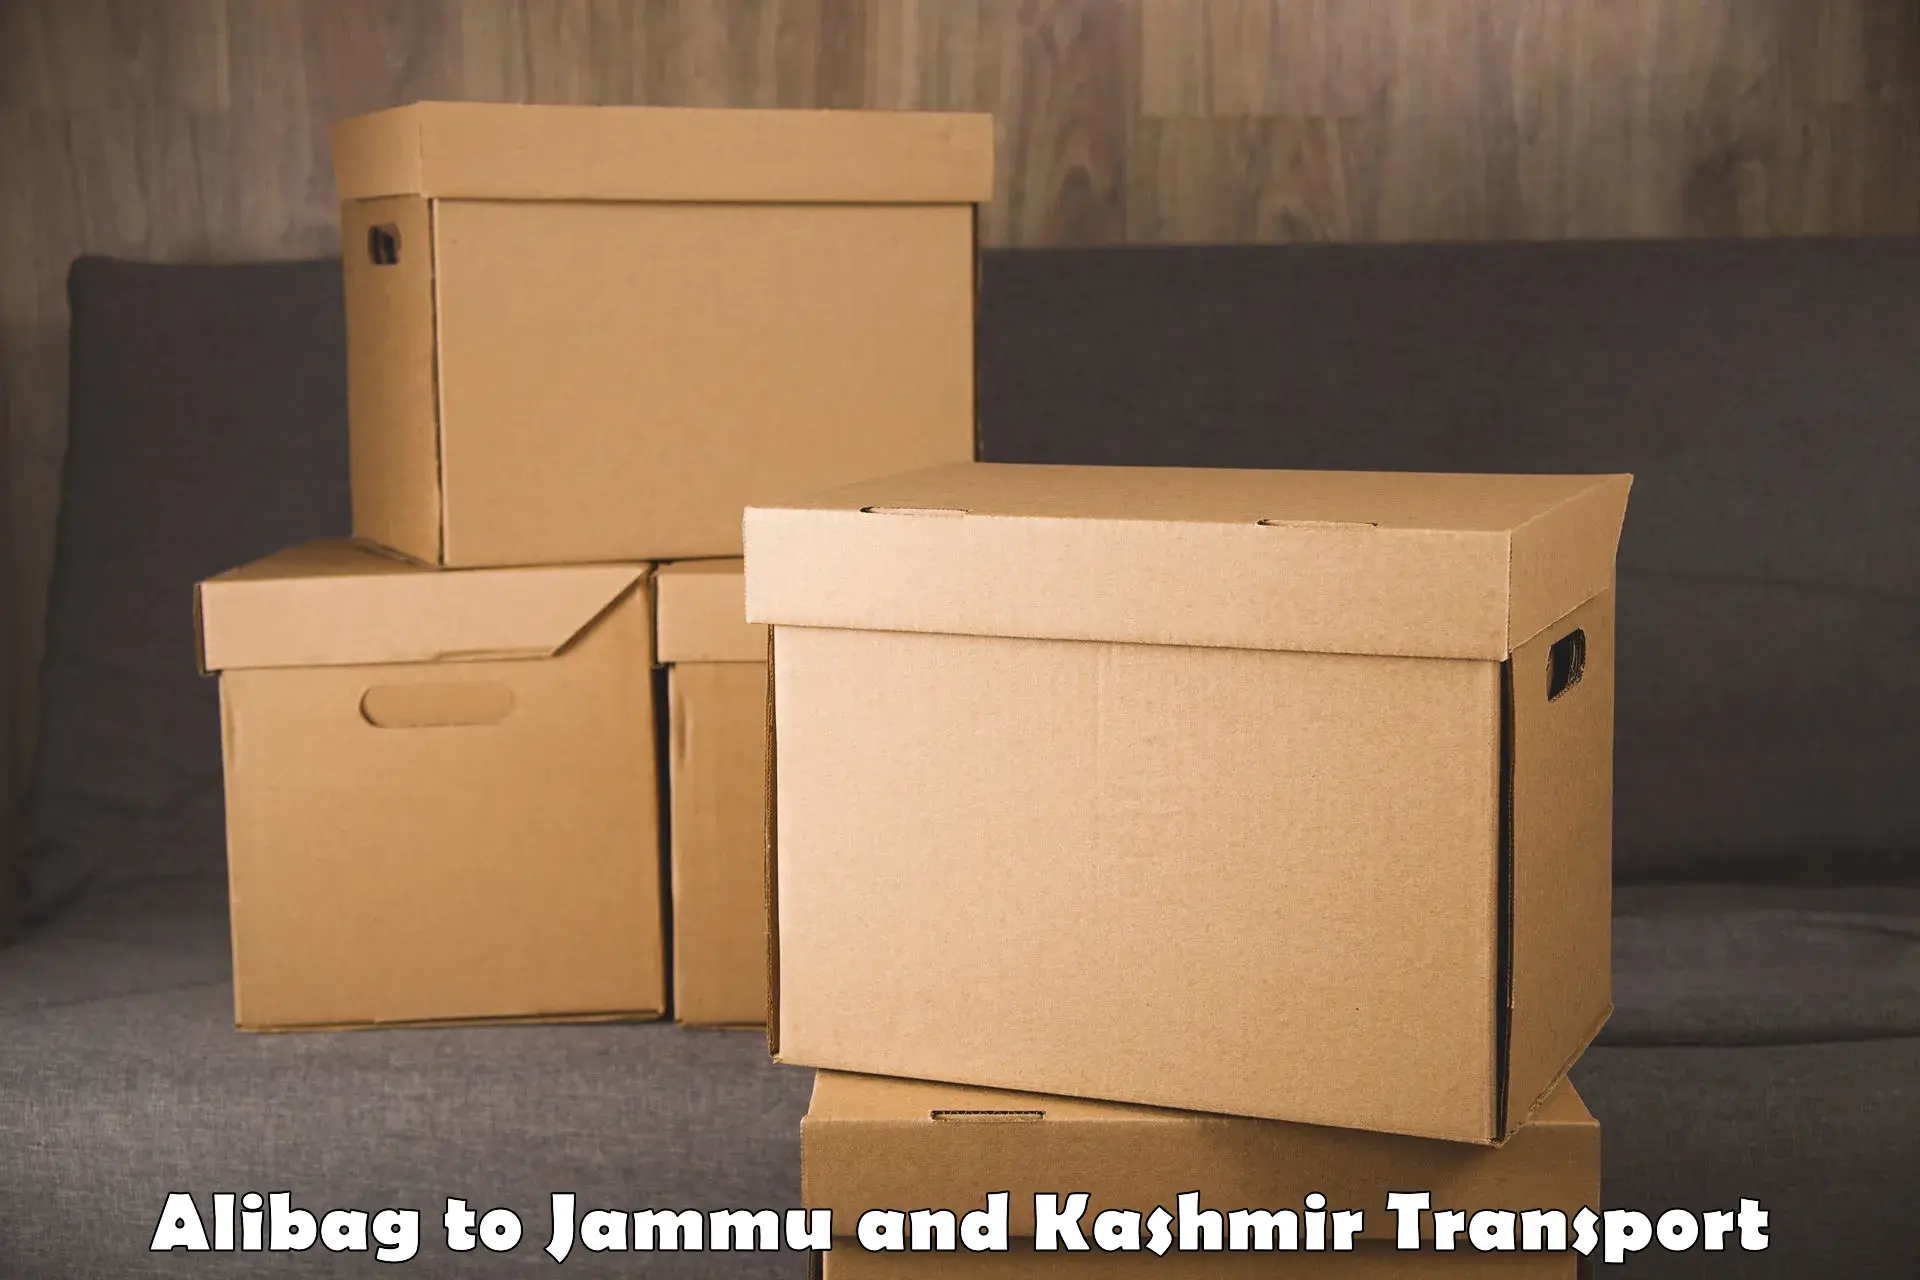 Commercial transport service Alibag to Ramban